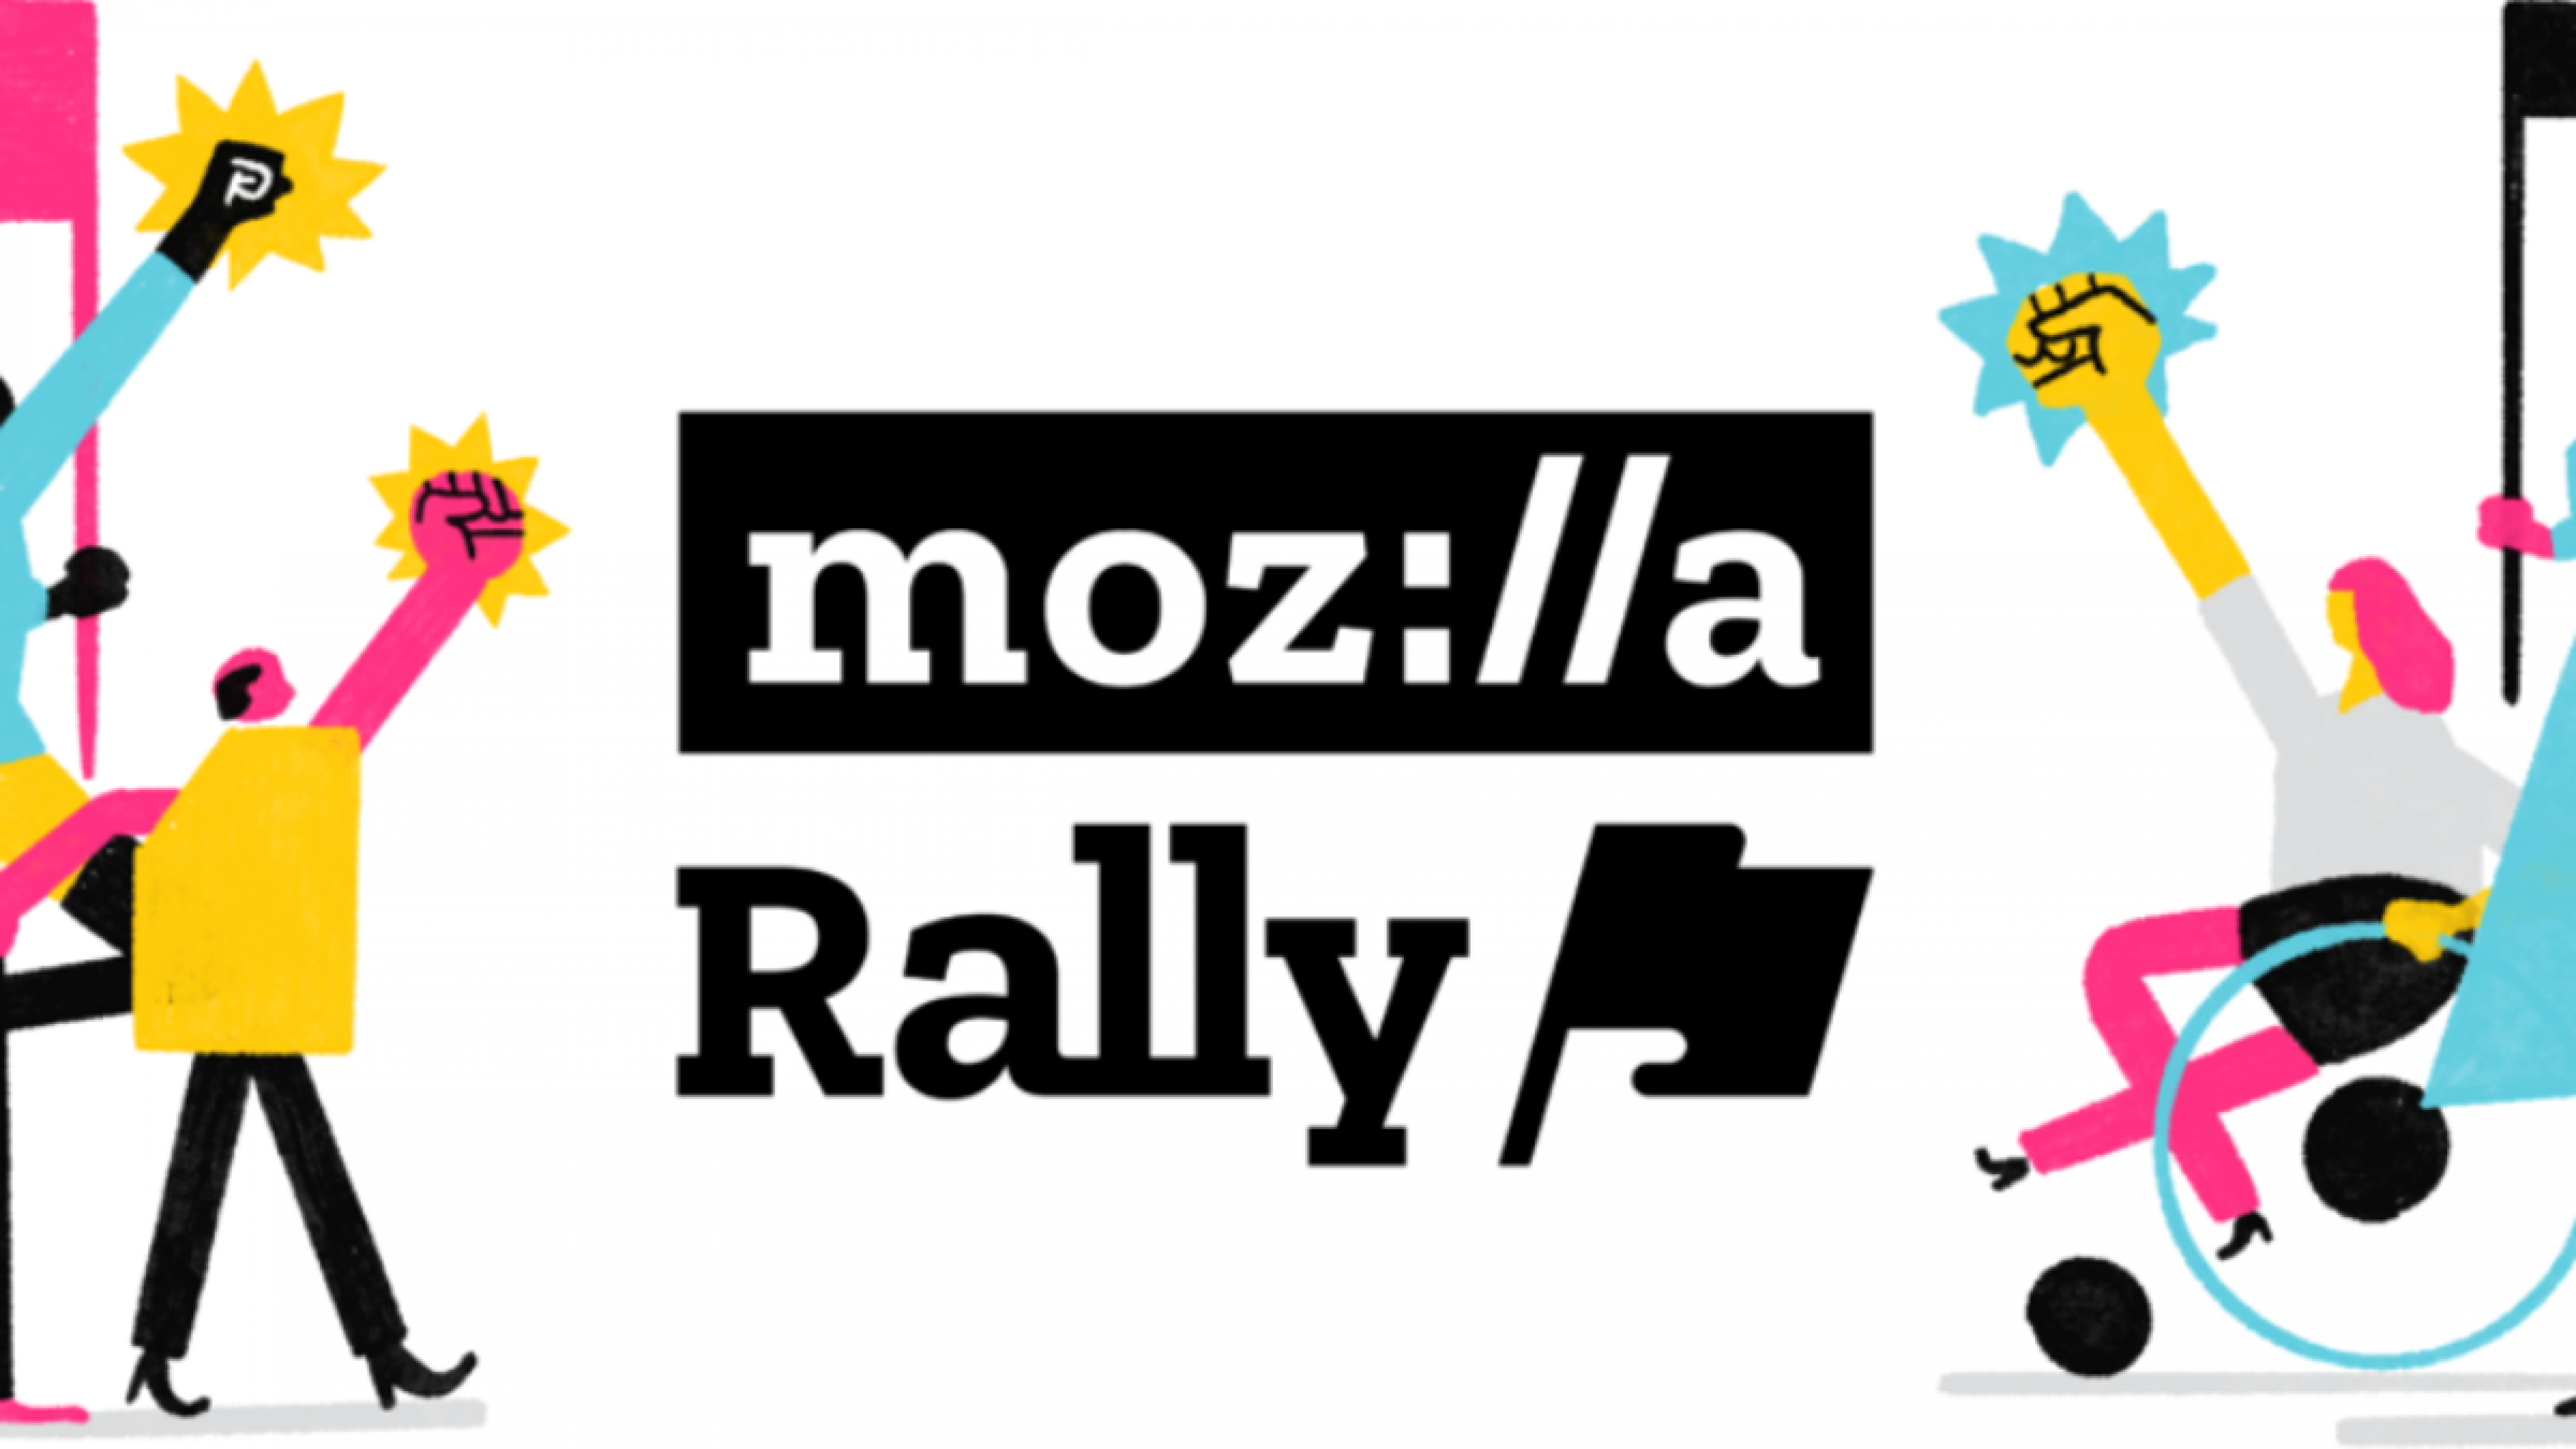 Rally, Mozilla’s New ‘Privacy-First’ Platform, Shares Your Data With Researchers Rather Than Advertisers